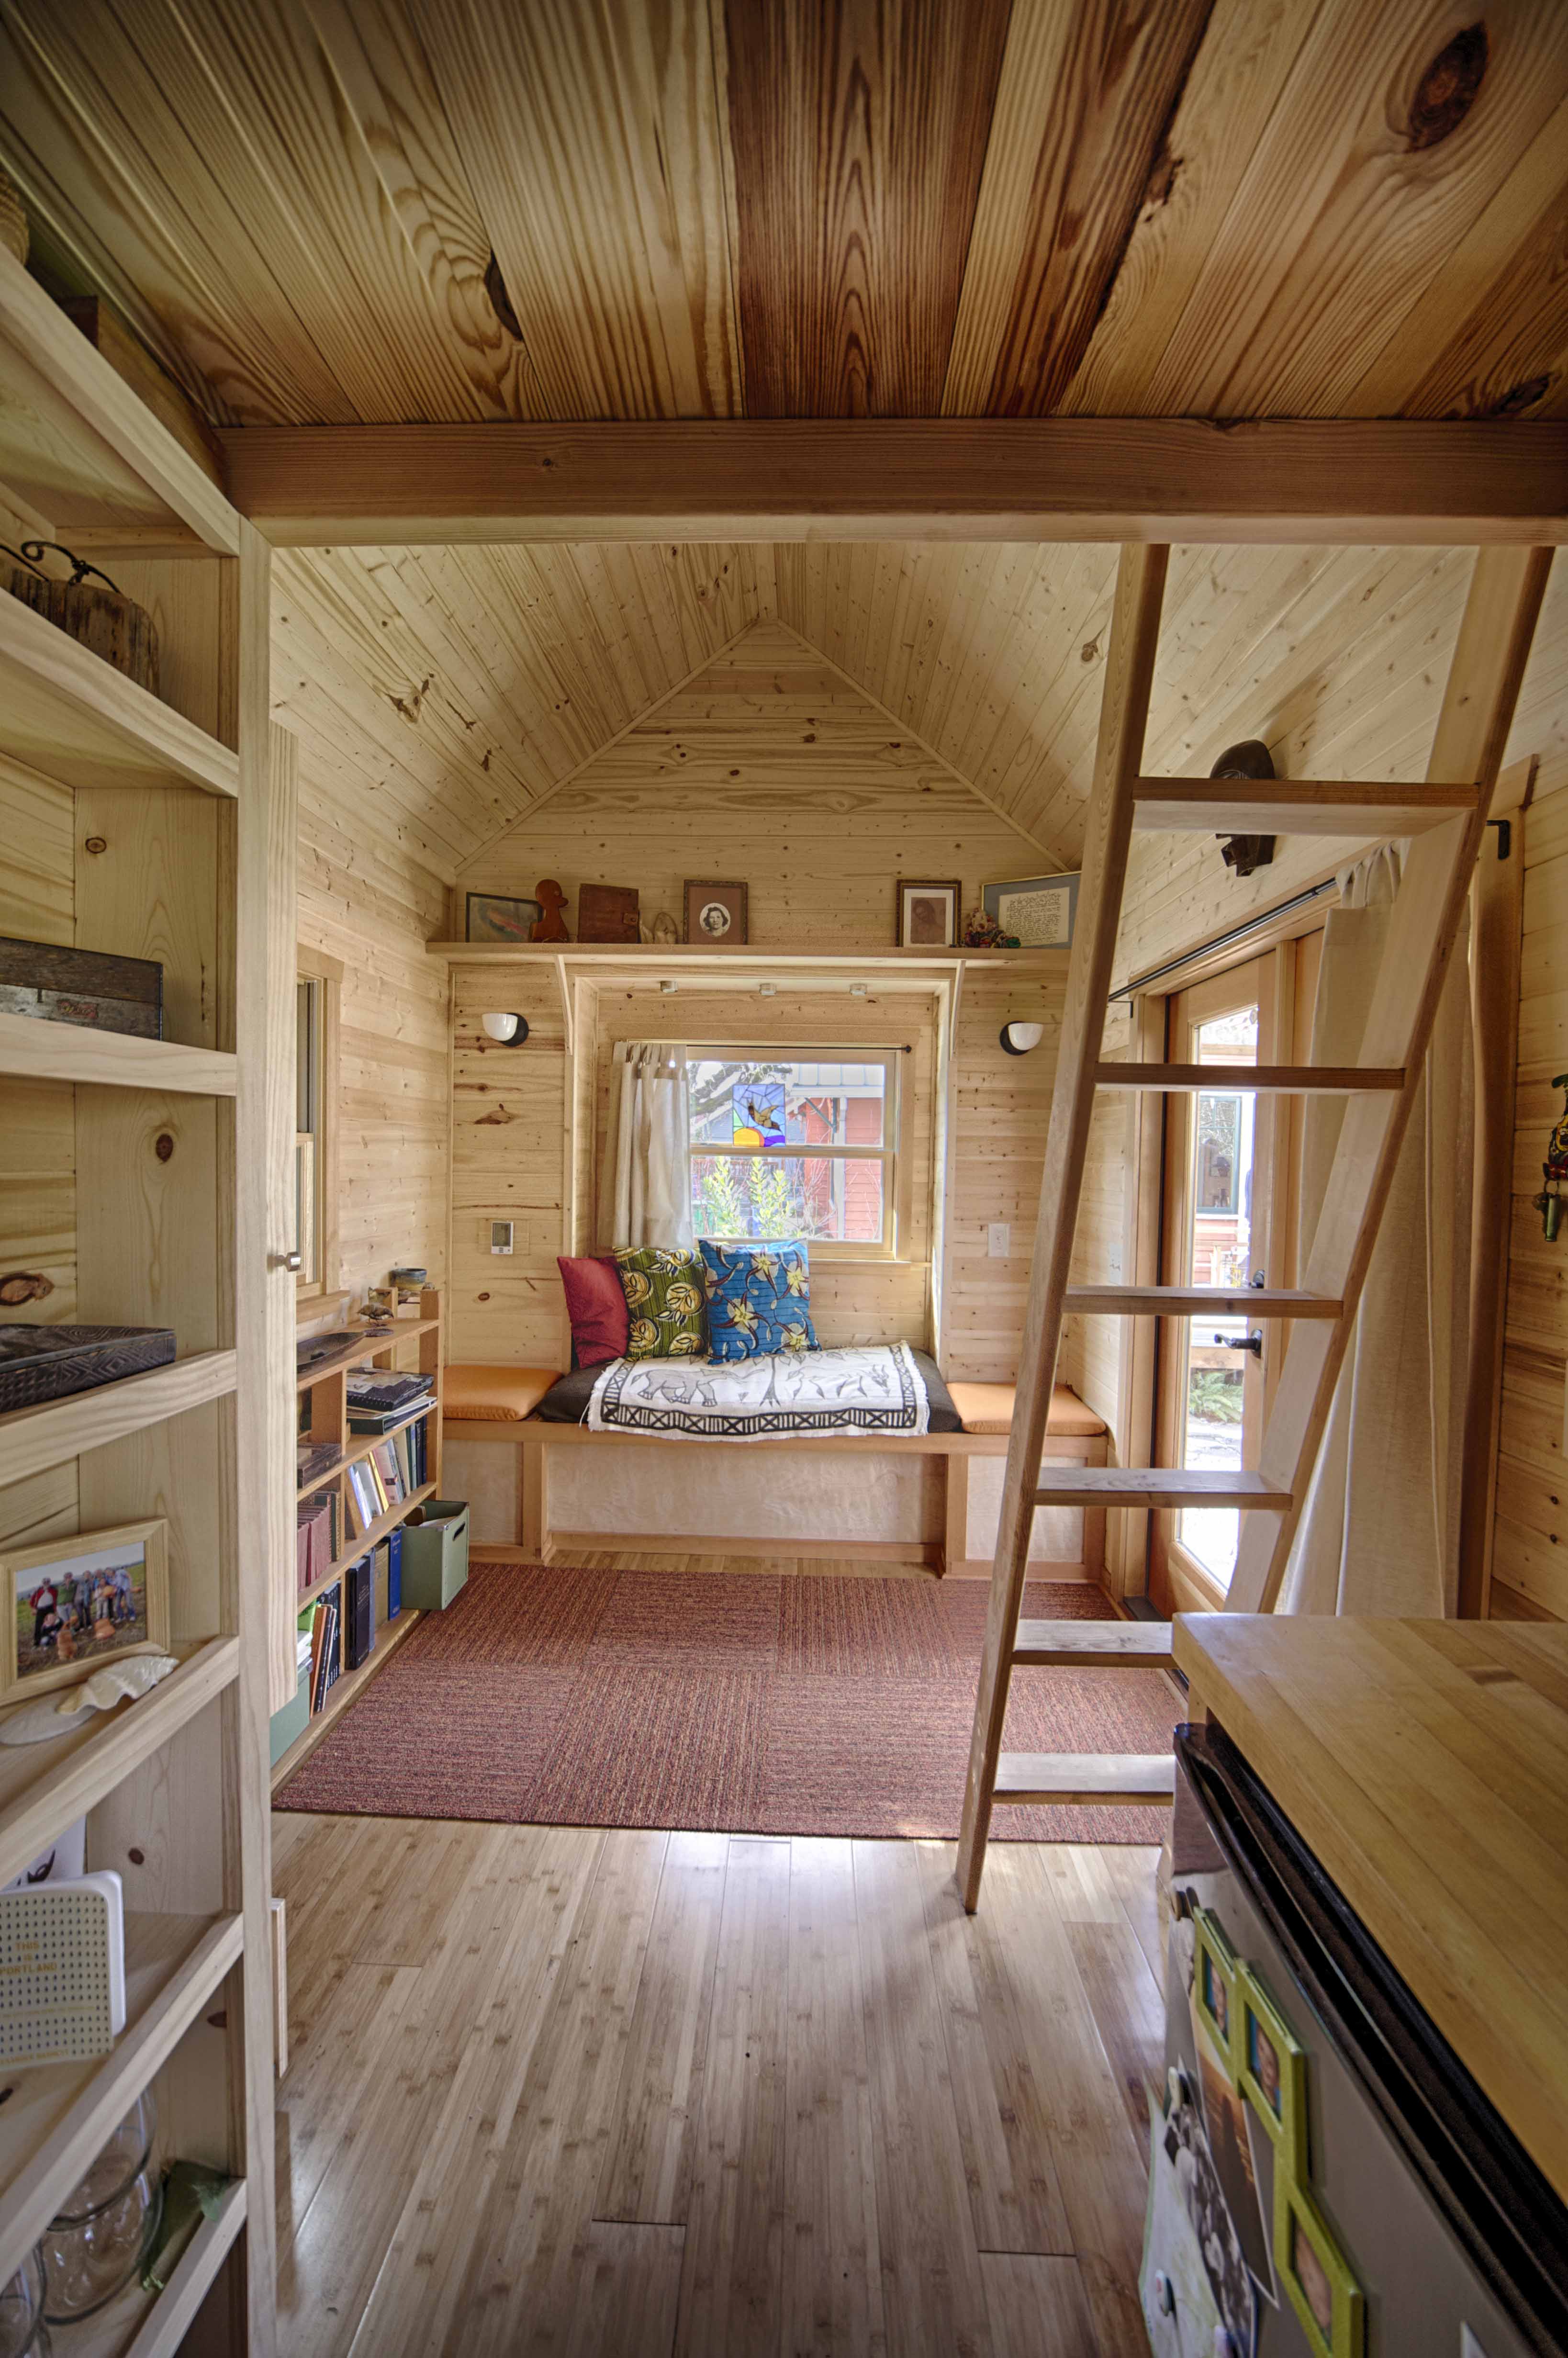 The Sweet Pea Tiny House Plans PADtinyhouses com